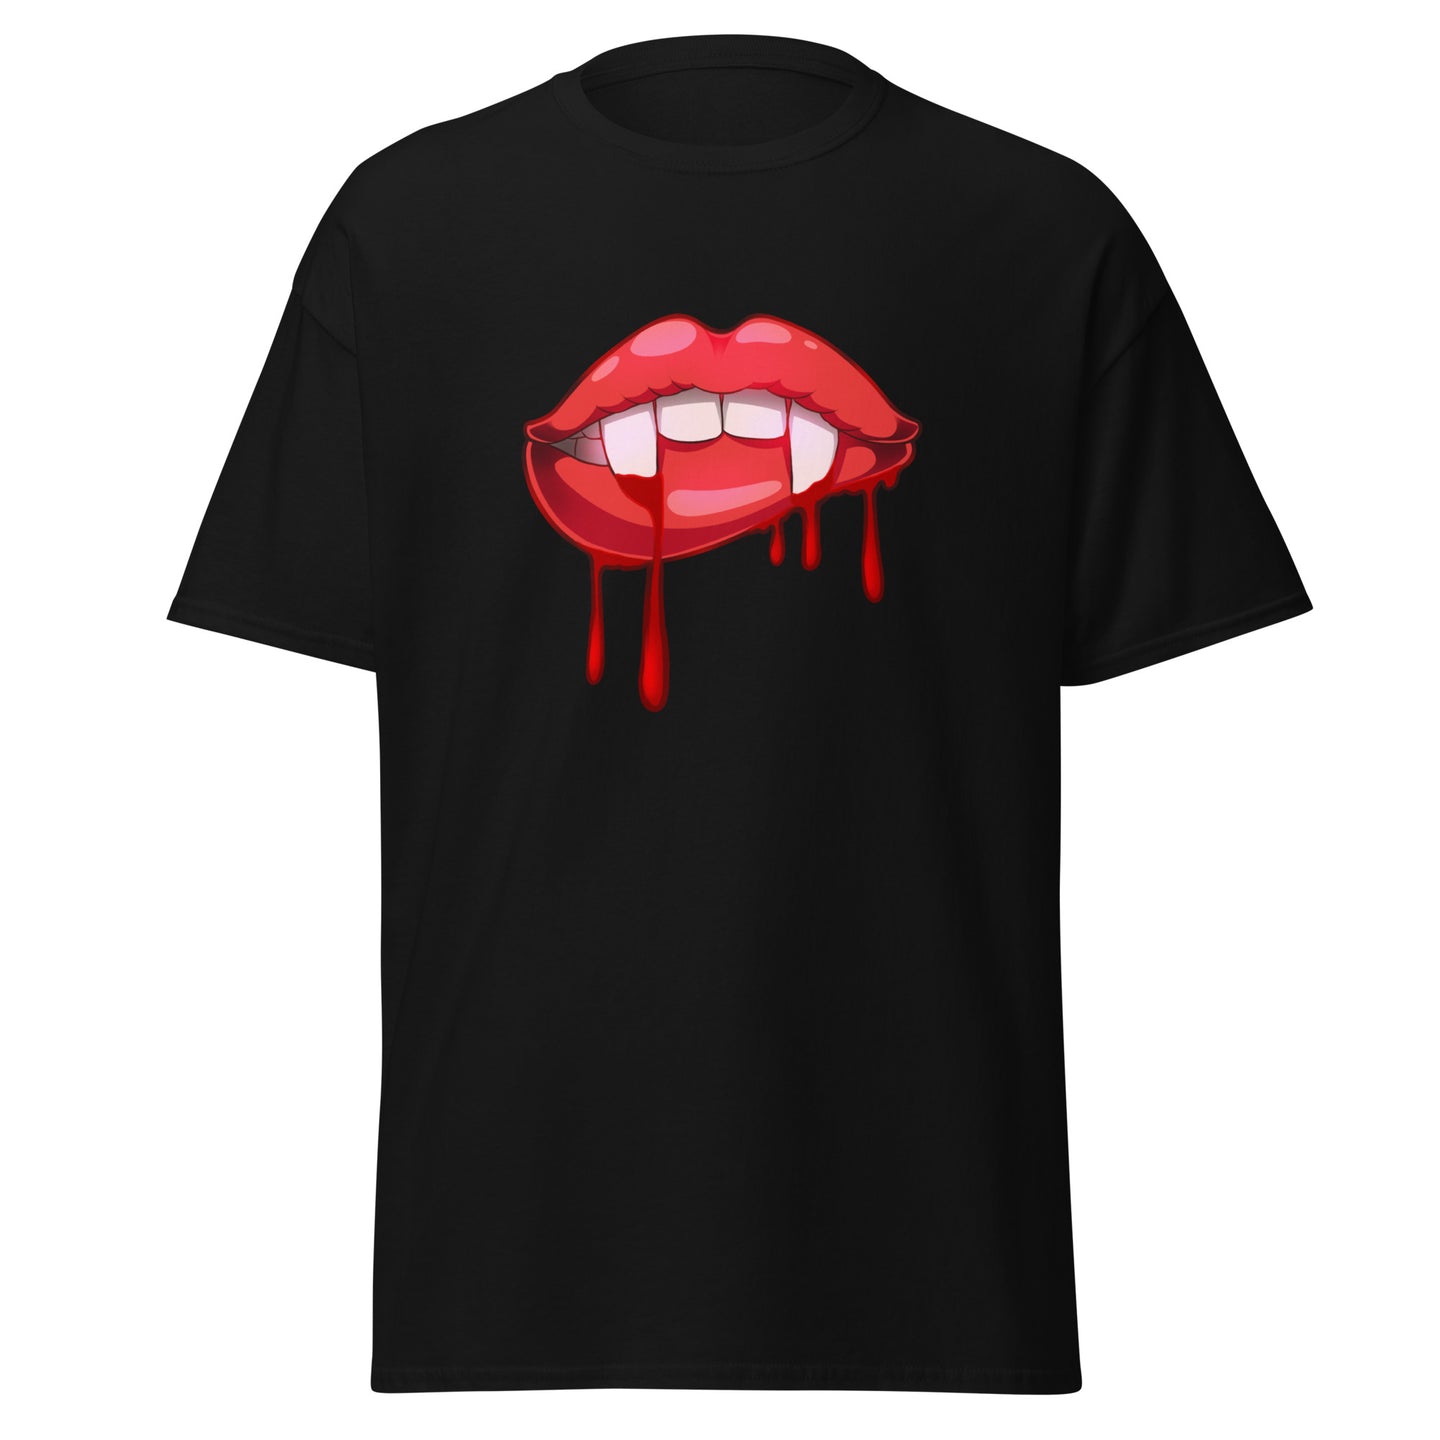 https://streamersvisuals.com/products/bloody-vampire-mouth-t-shirt